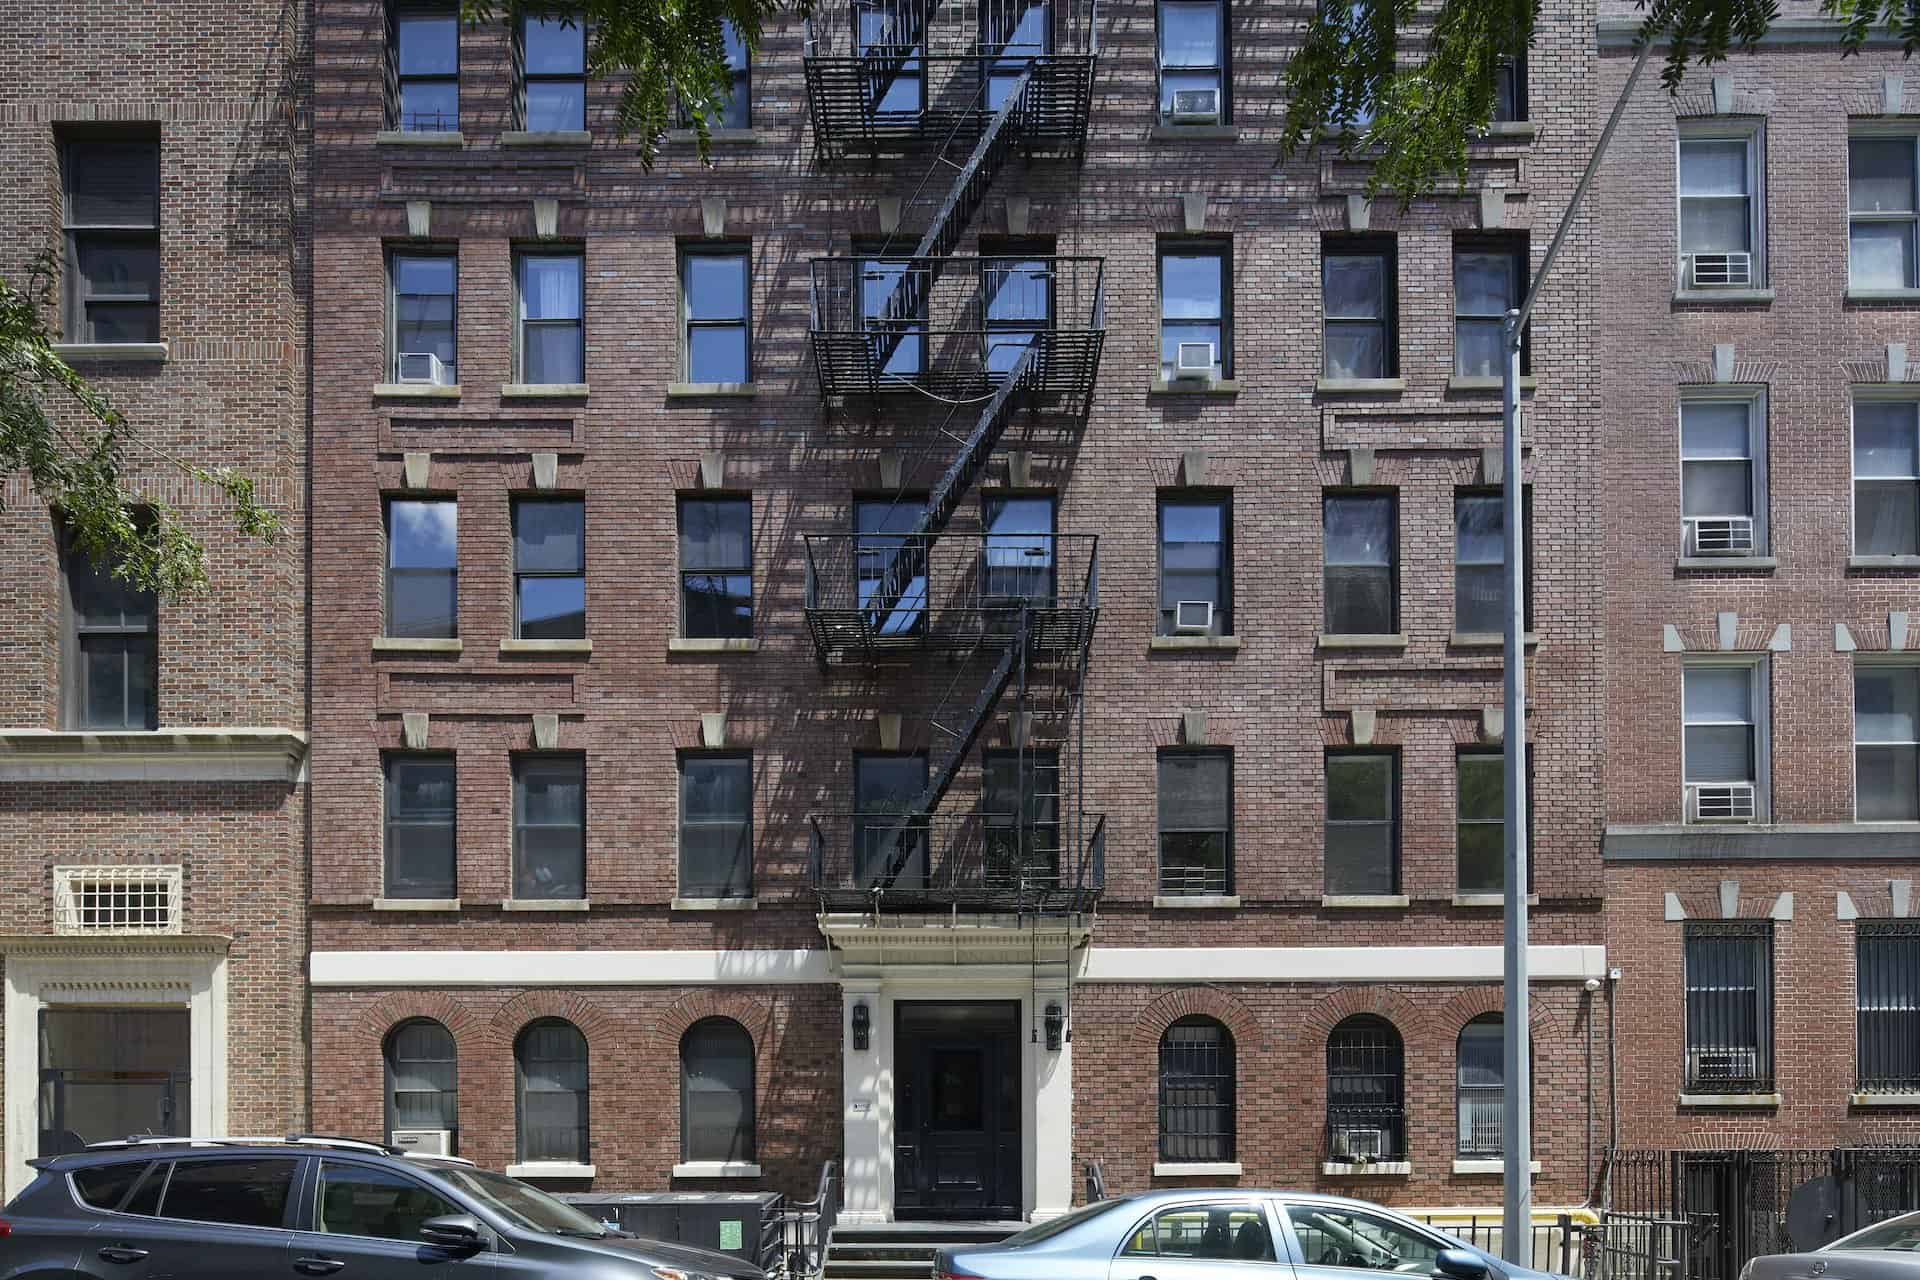 Exterior of 245 East 30th Street apartments in Kips Bay. Brick residential building with fire escape down the middle.